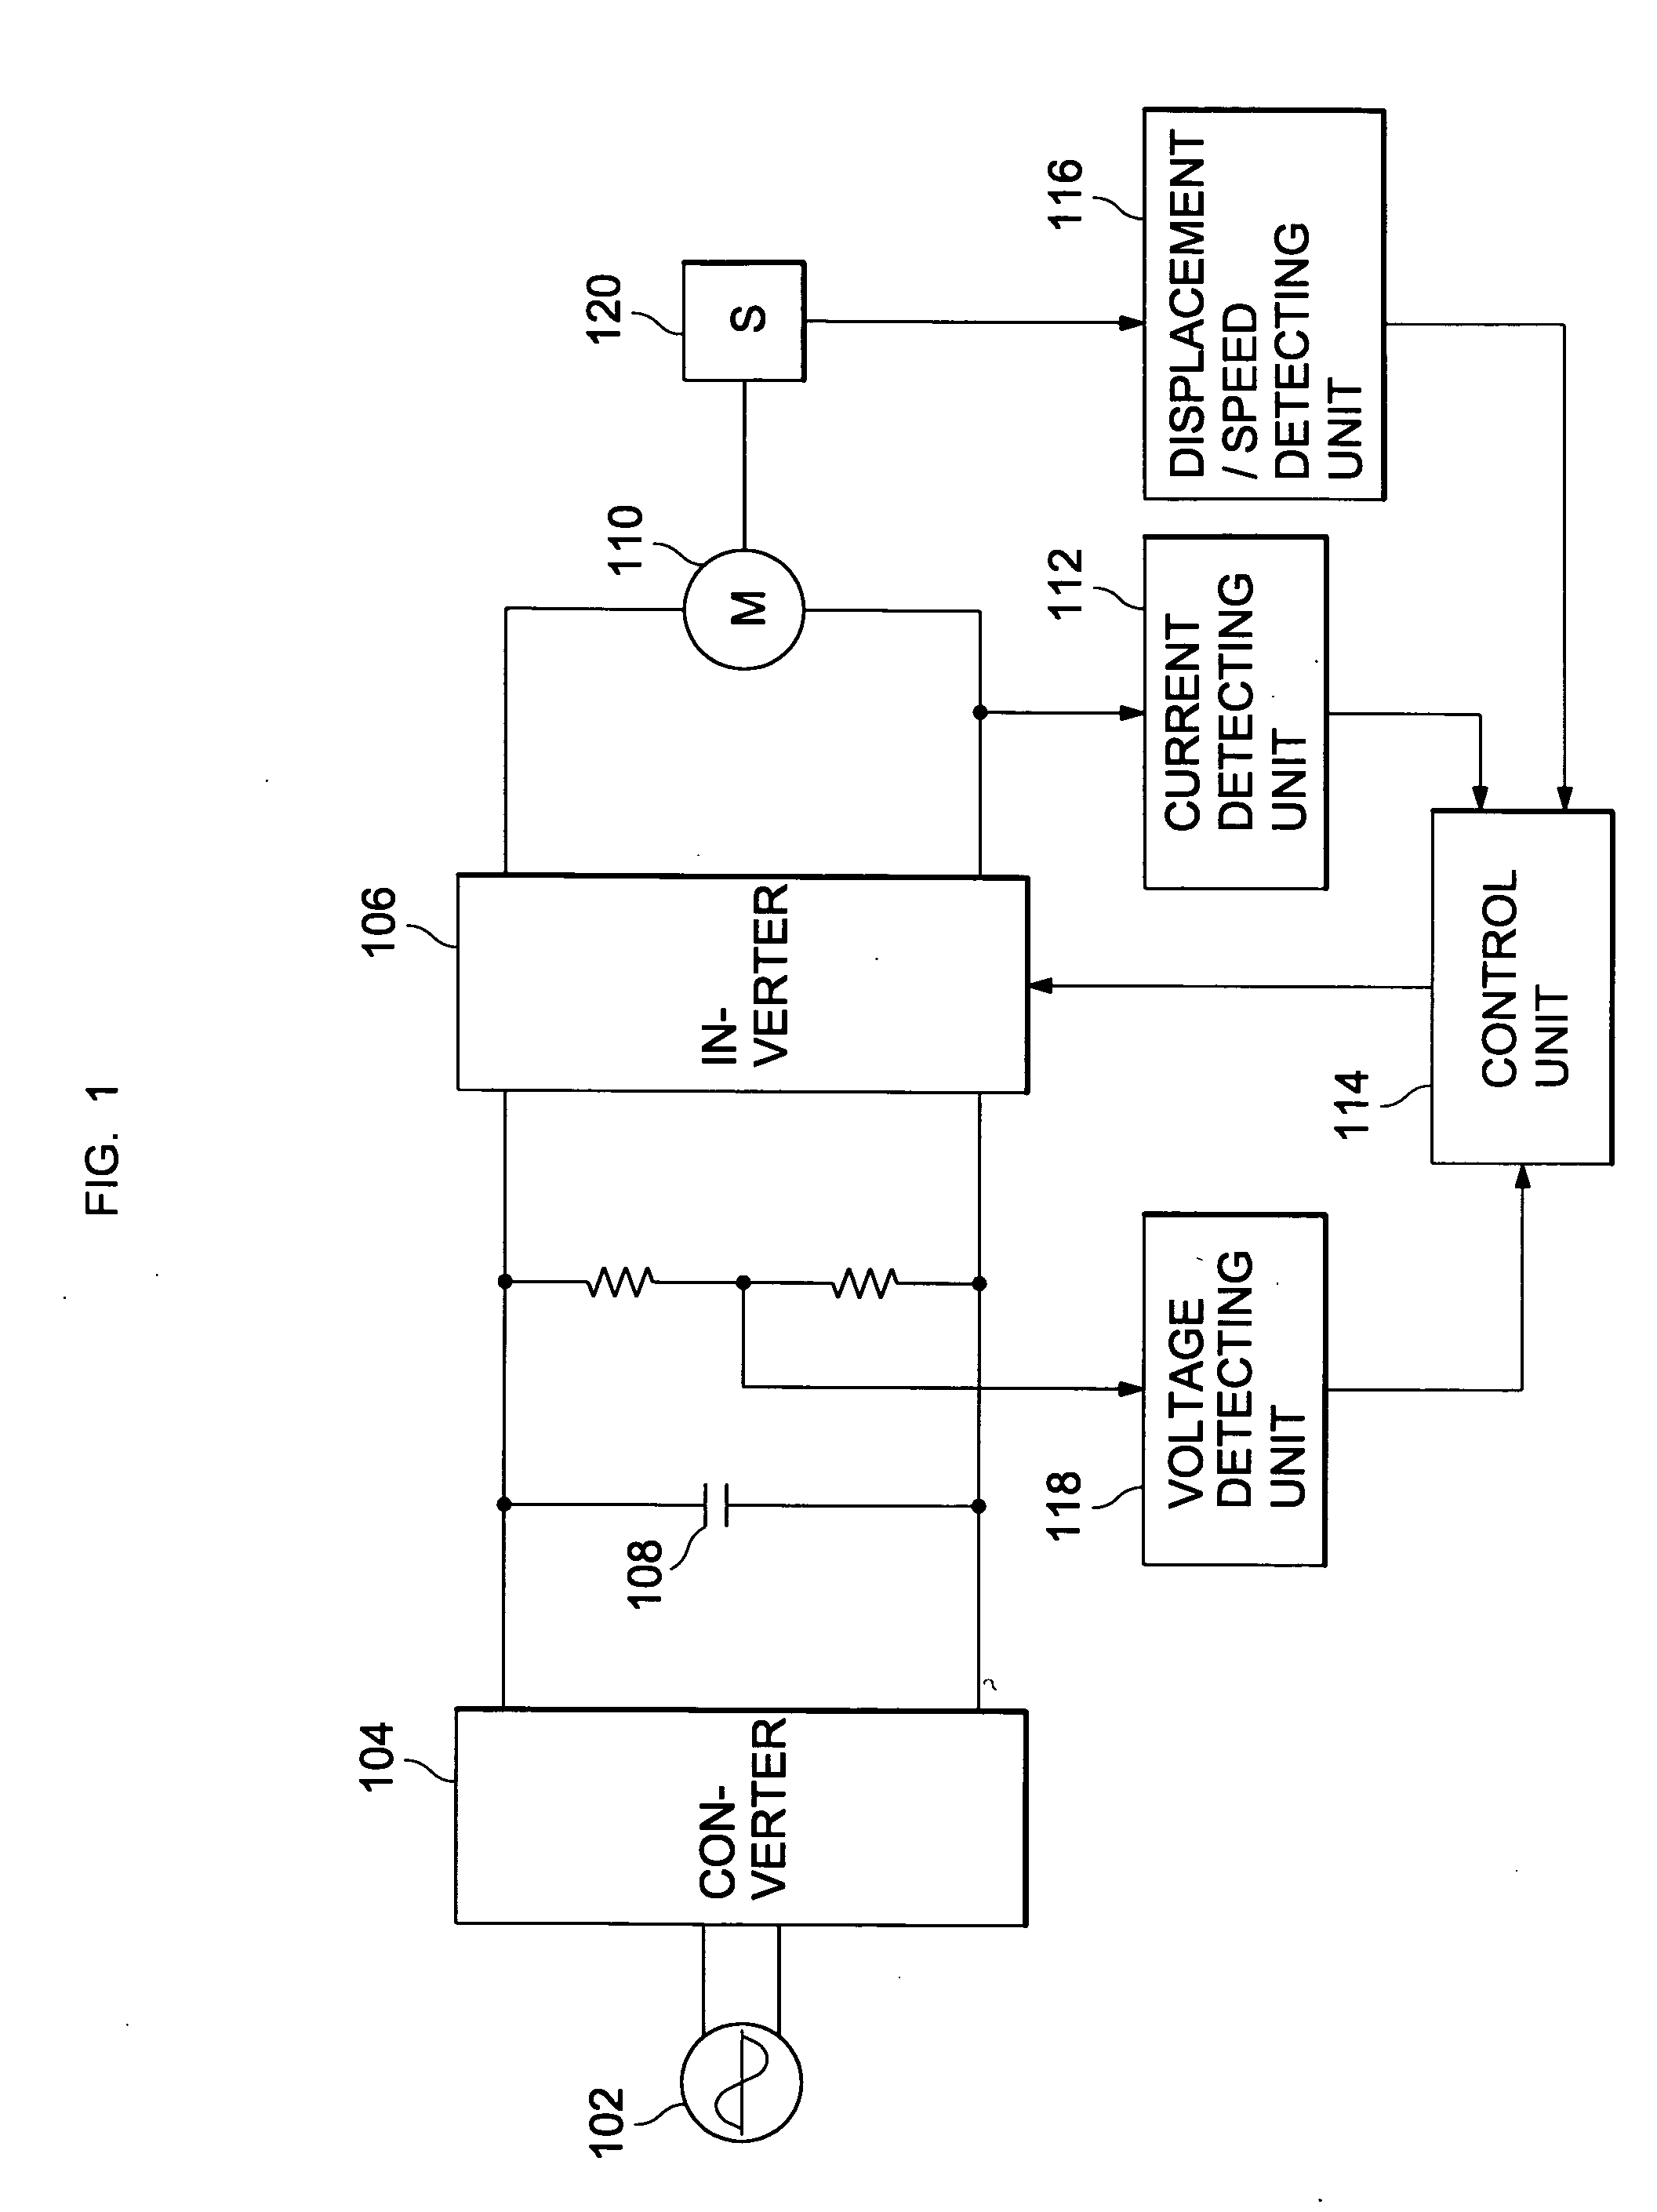 Linear compressor and apparatus to control the same